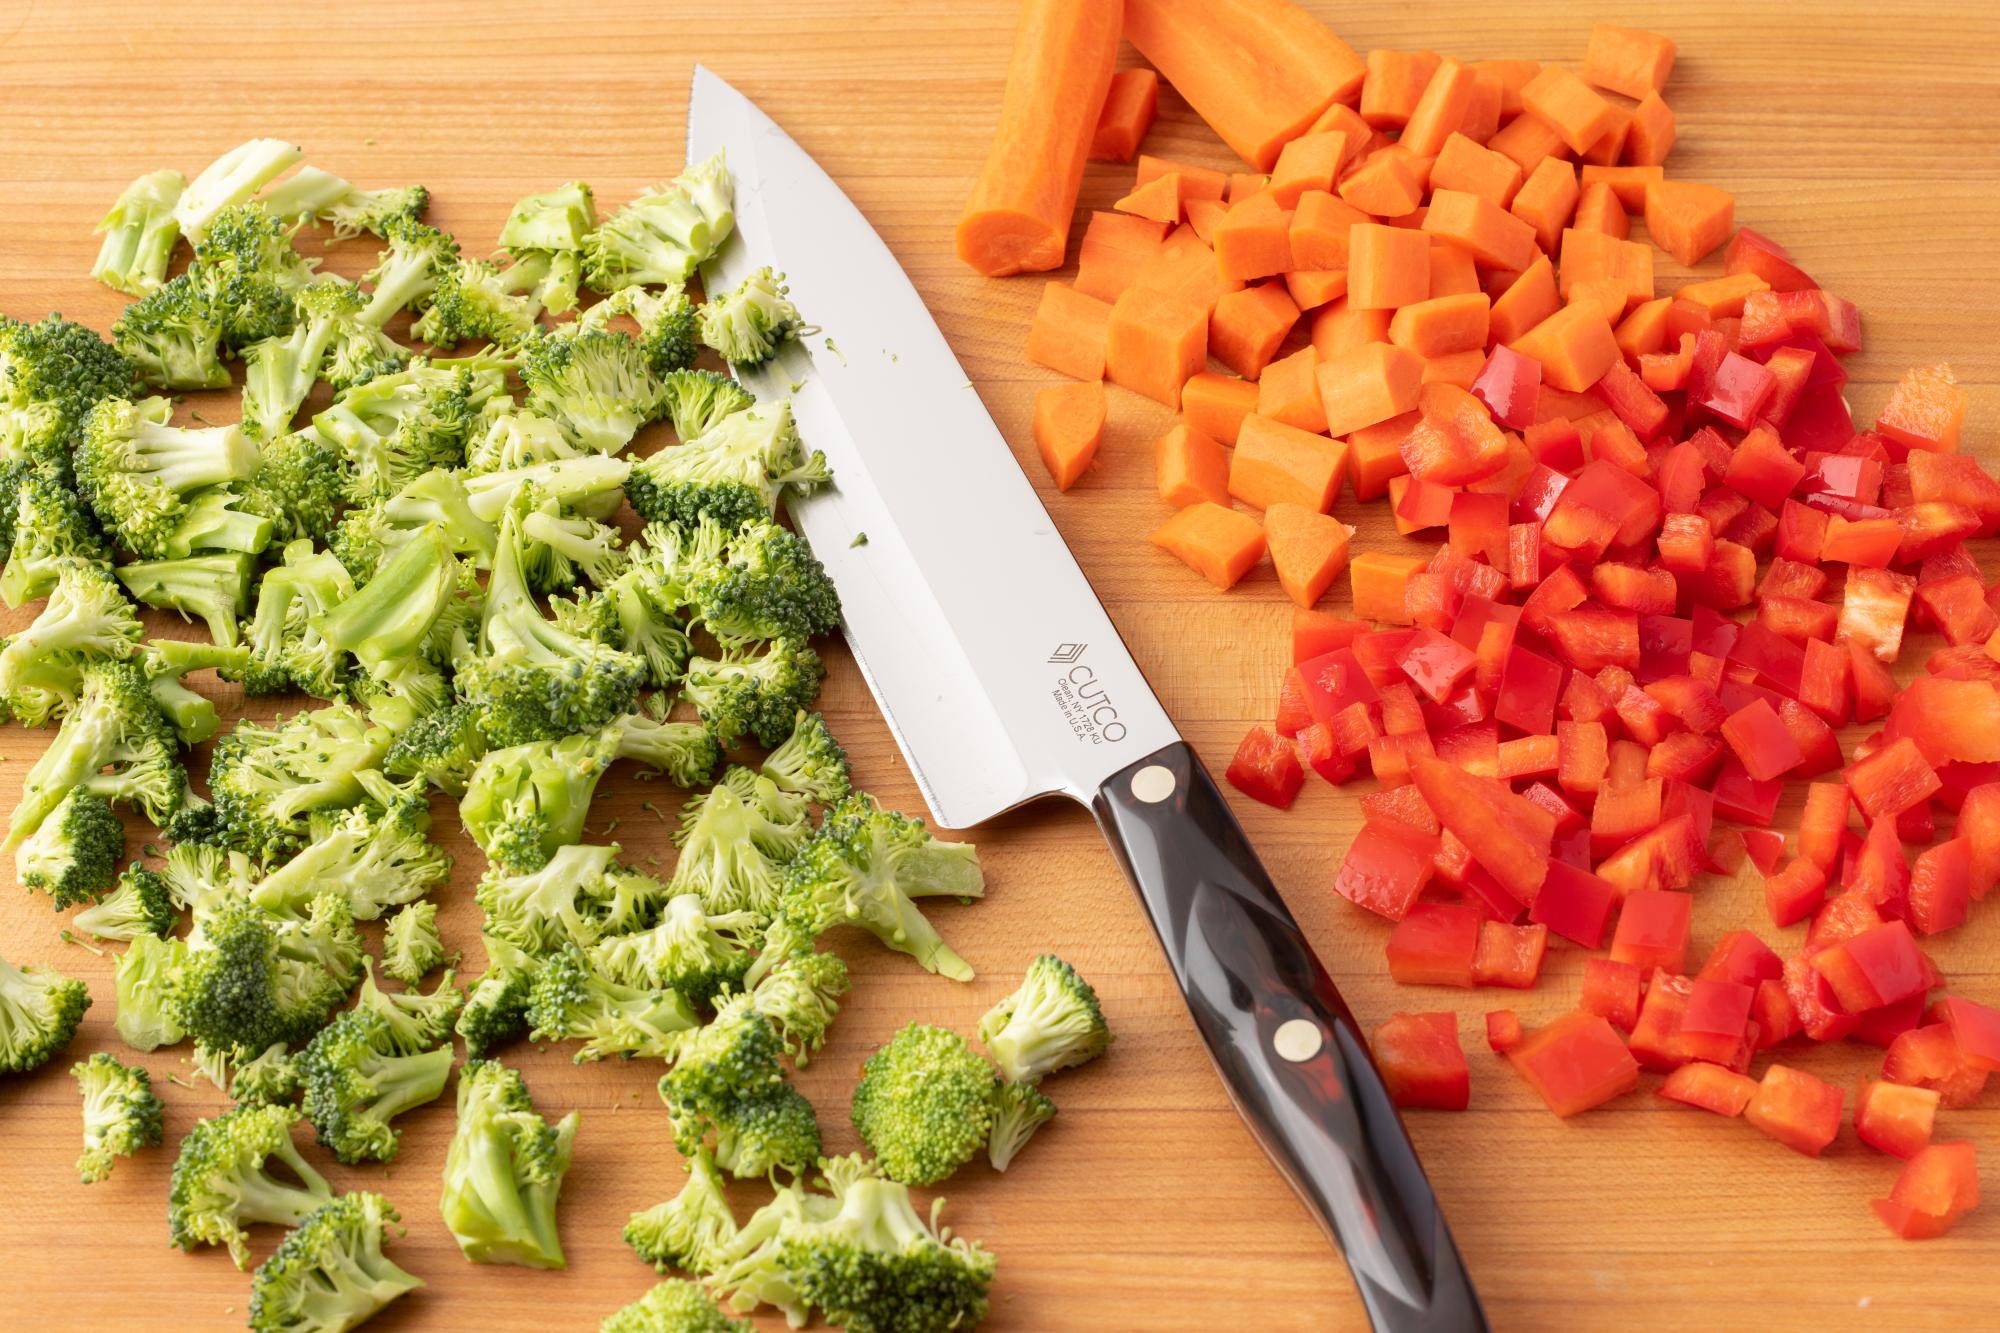 The Petite Chef is perfect for the carrots, red pepper and broccoli.